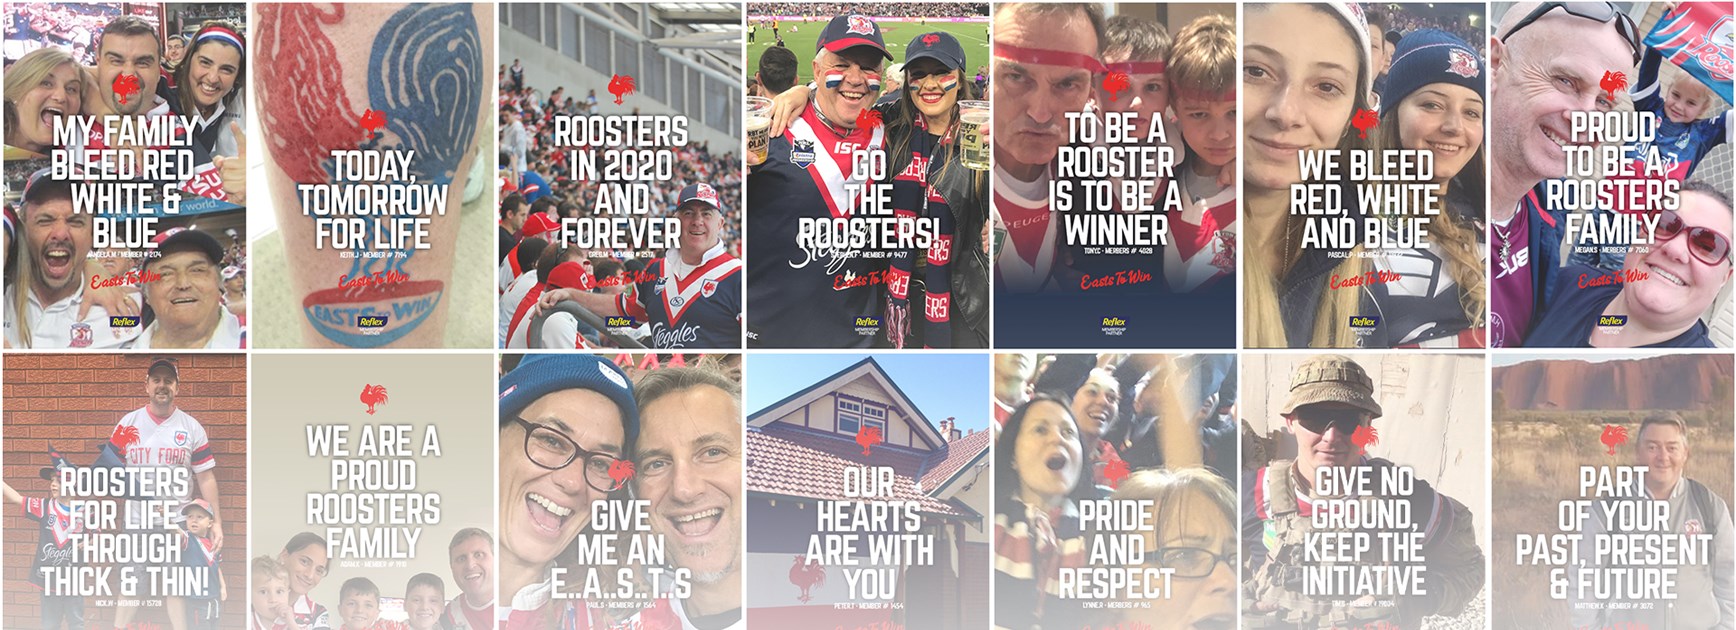 Every Roosters fan can be a Member